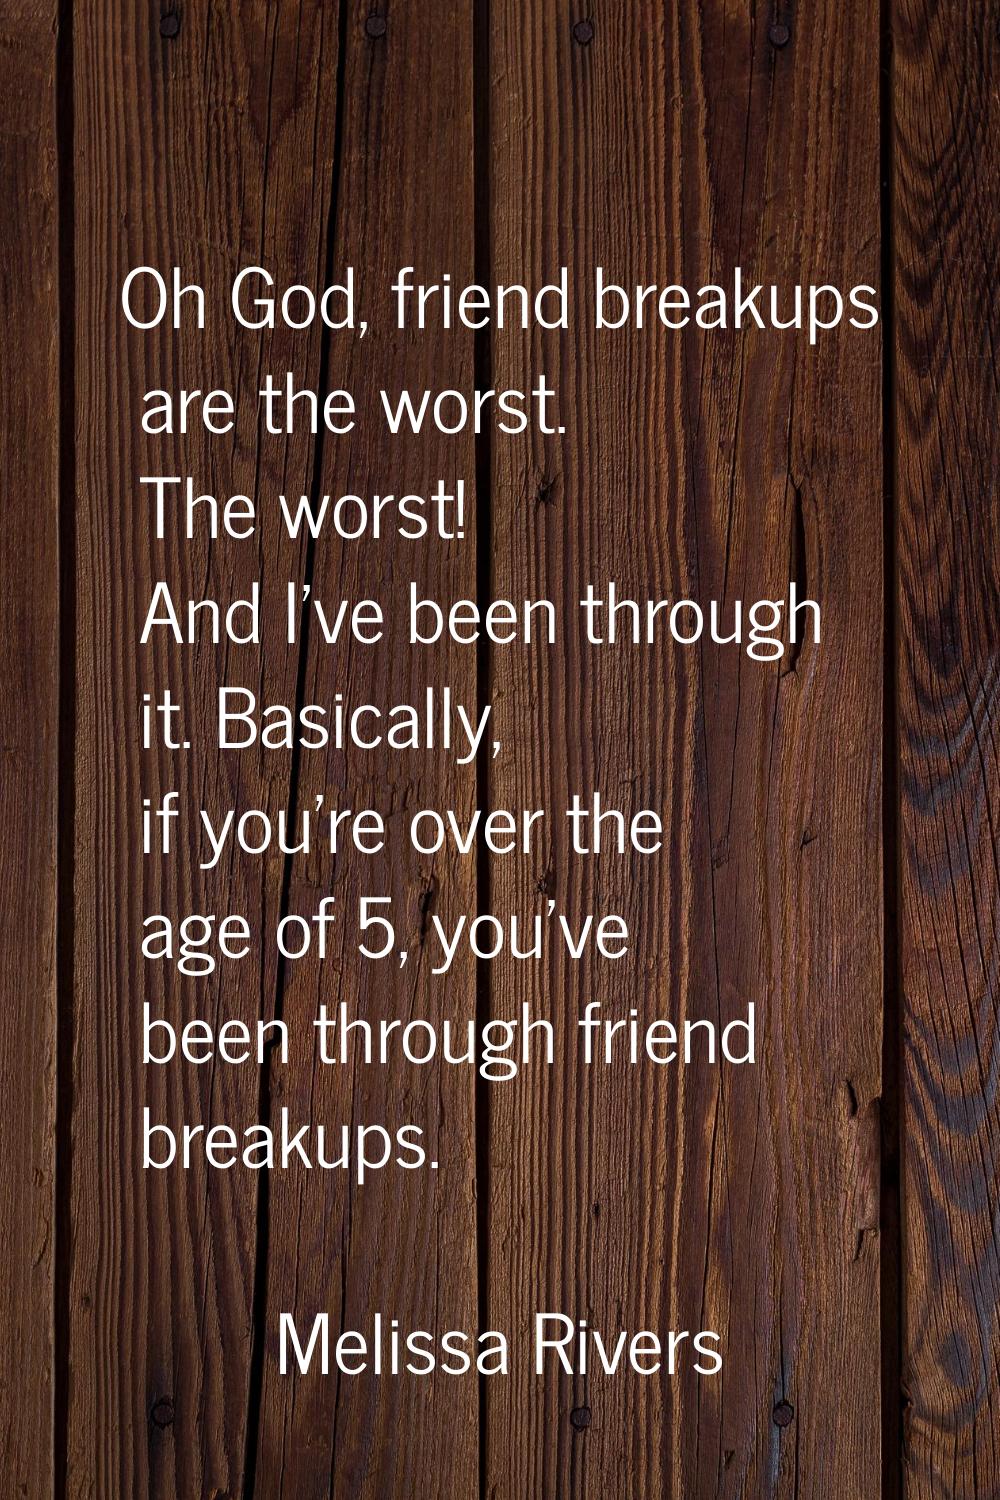 Oh God, friend breakups are the worst. The worst! And I've been through it. Basically, if you're ov